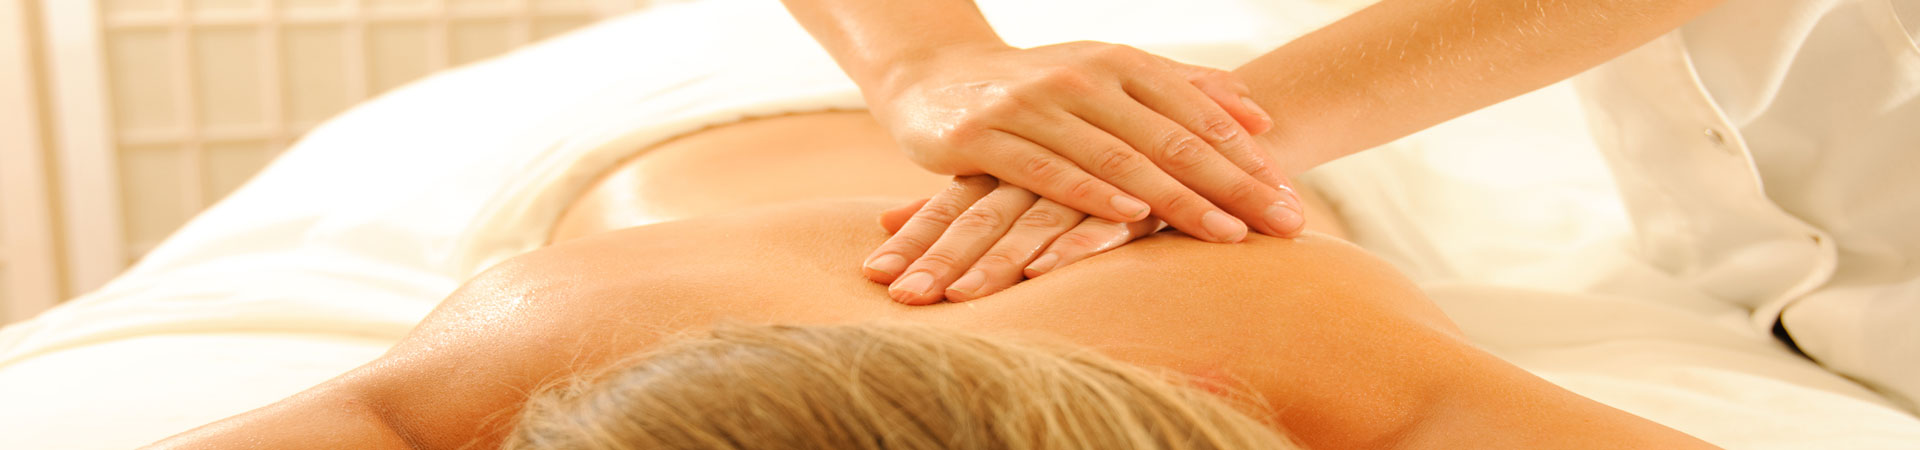 Special August Offer on Massage Therapy